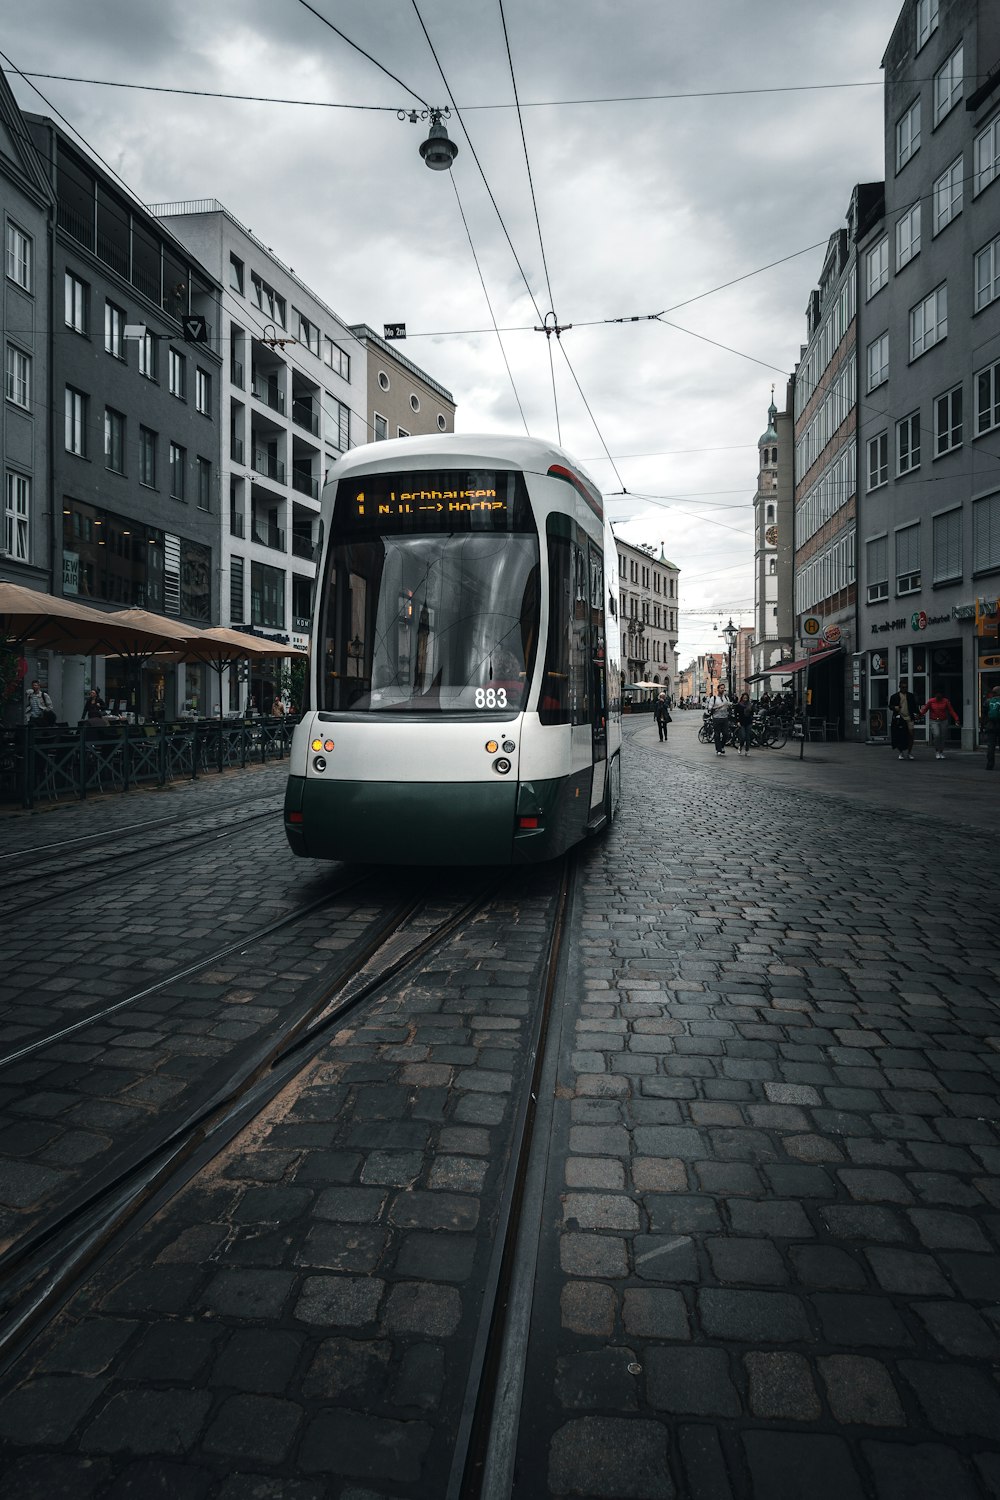 white and green tram on road during daytime